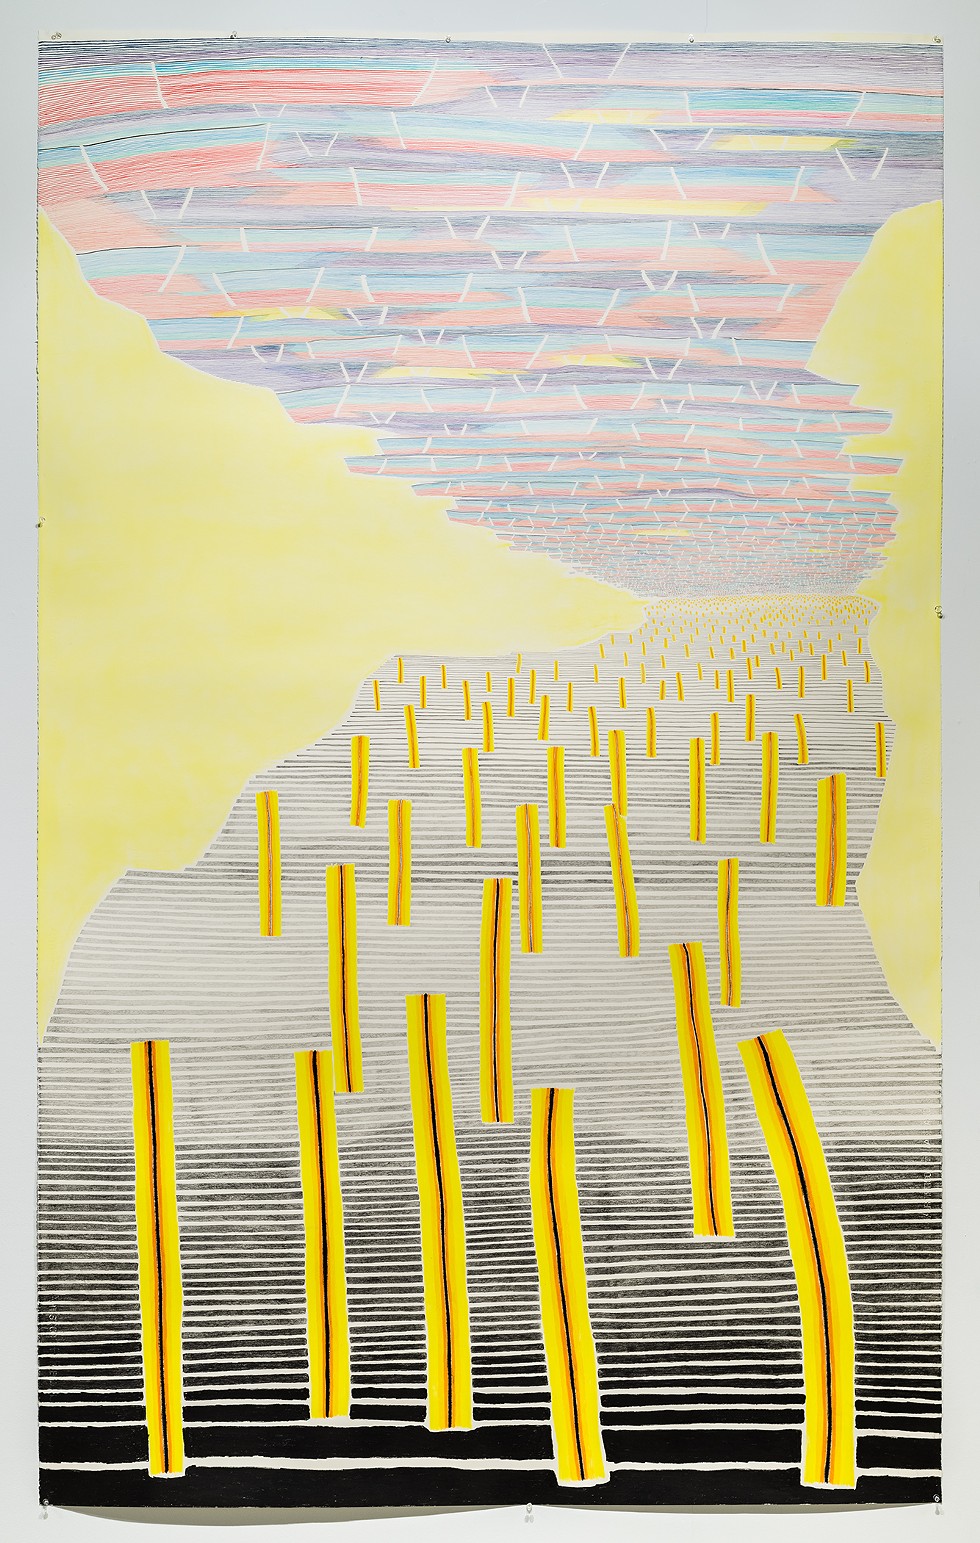 Kathranne Knight, Above/Below, 2014, color pencil on paper, 90 x 55 inches